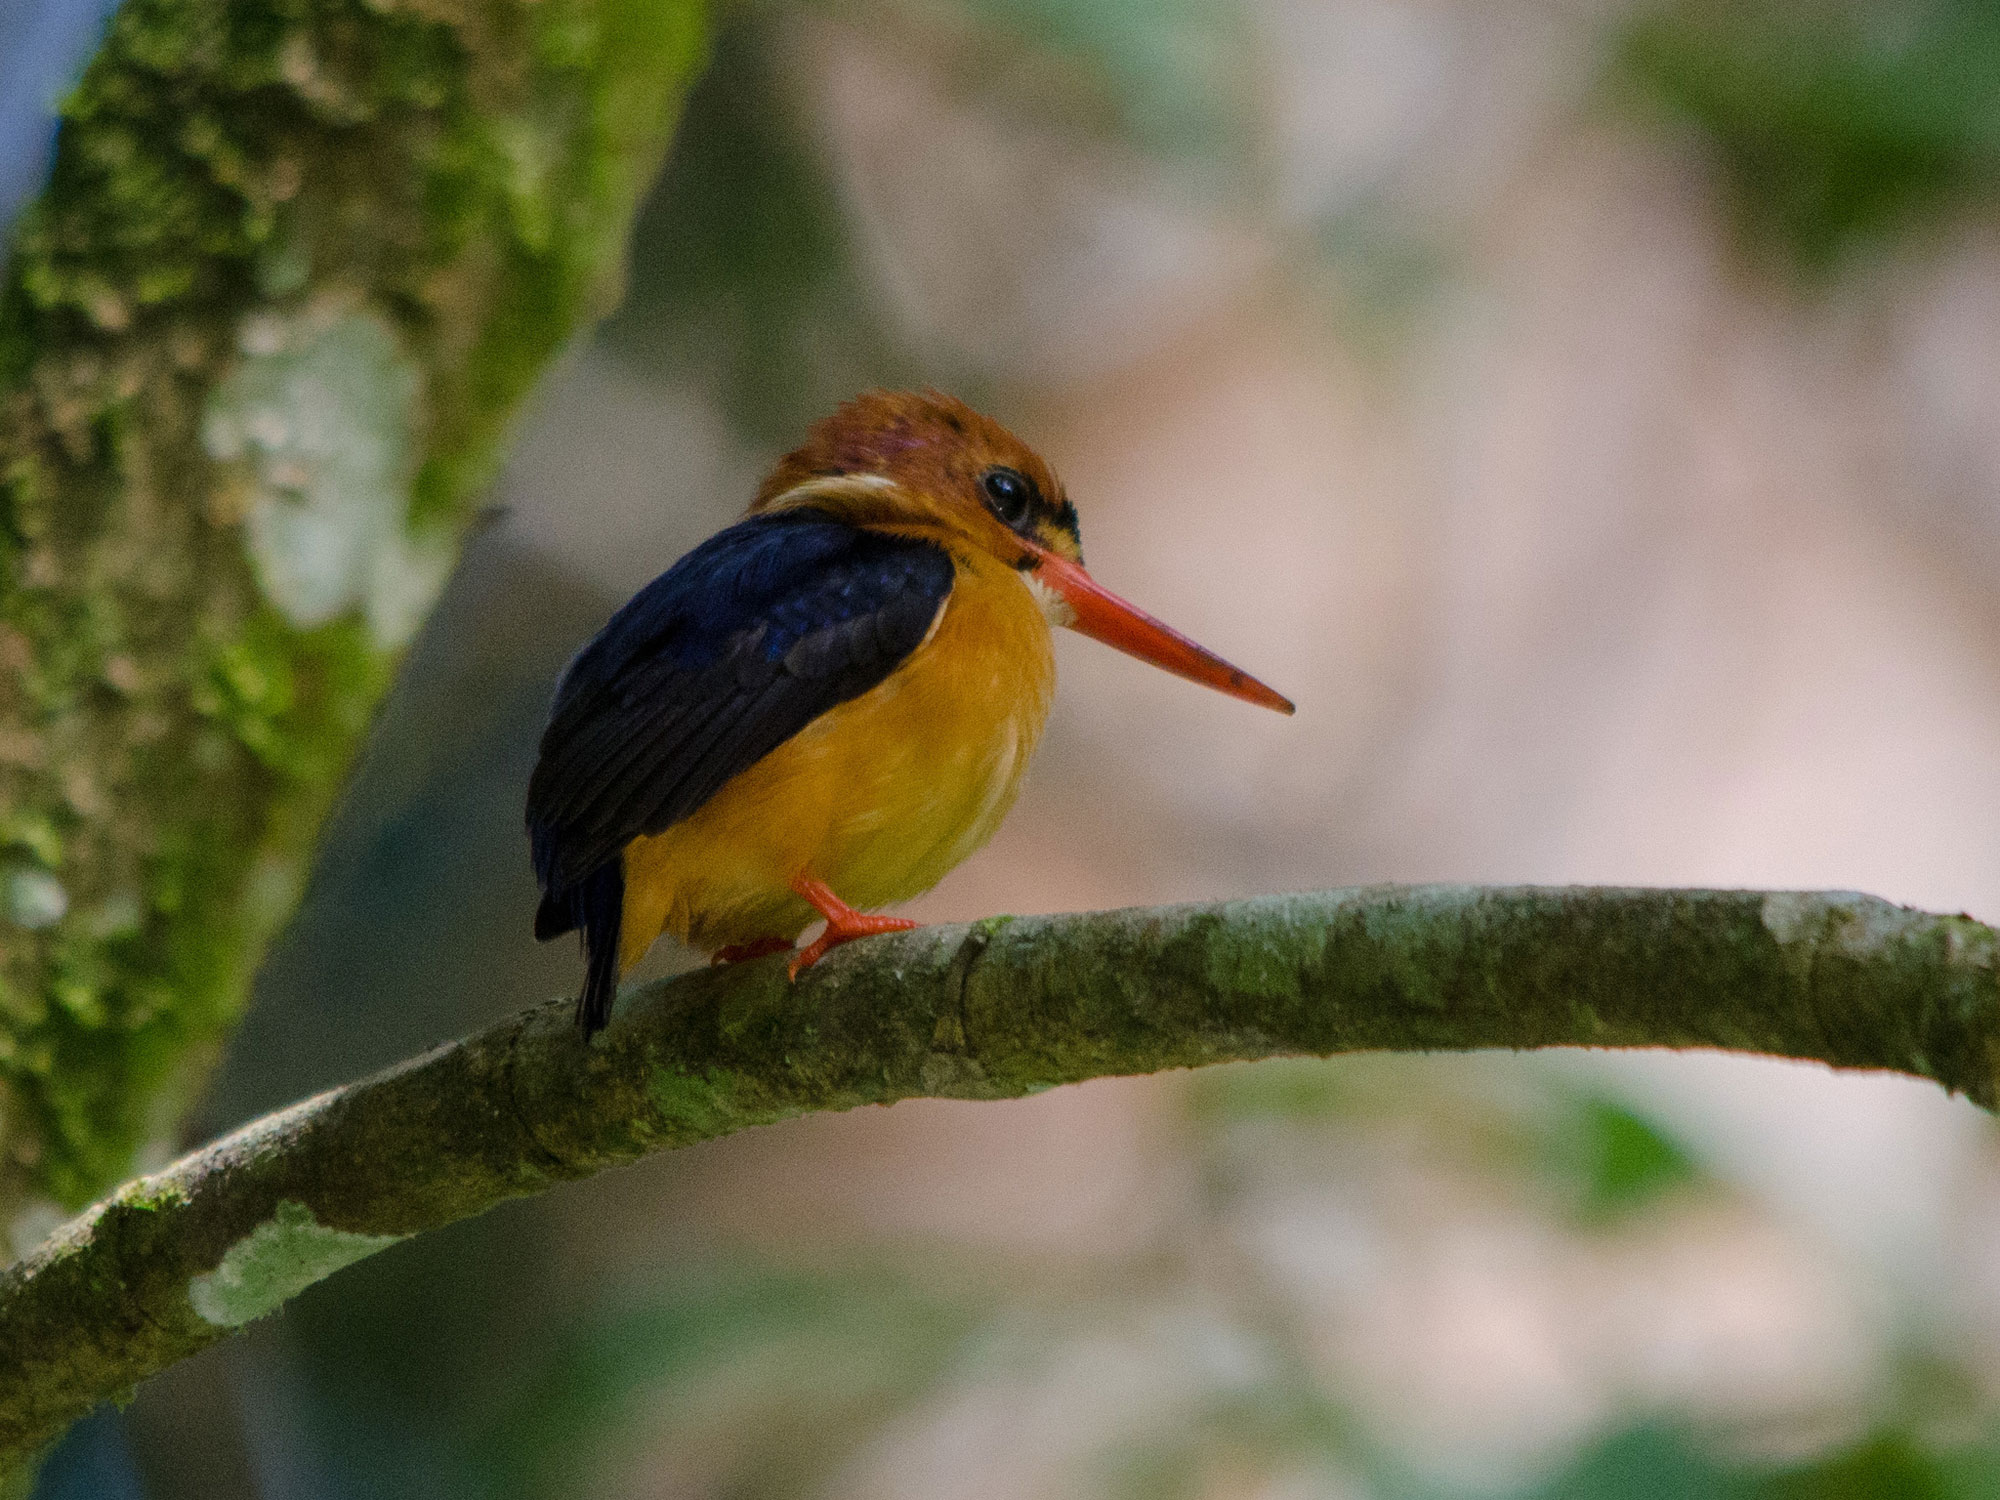 Photograph of an African dwarf kingfisher perched on a branch. The photo shows a small bird with a brown head, an orange beak, dark blue wings and a dark blue tail, and a yellow breast.